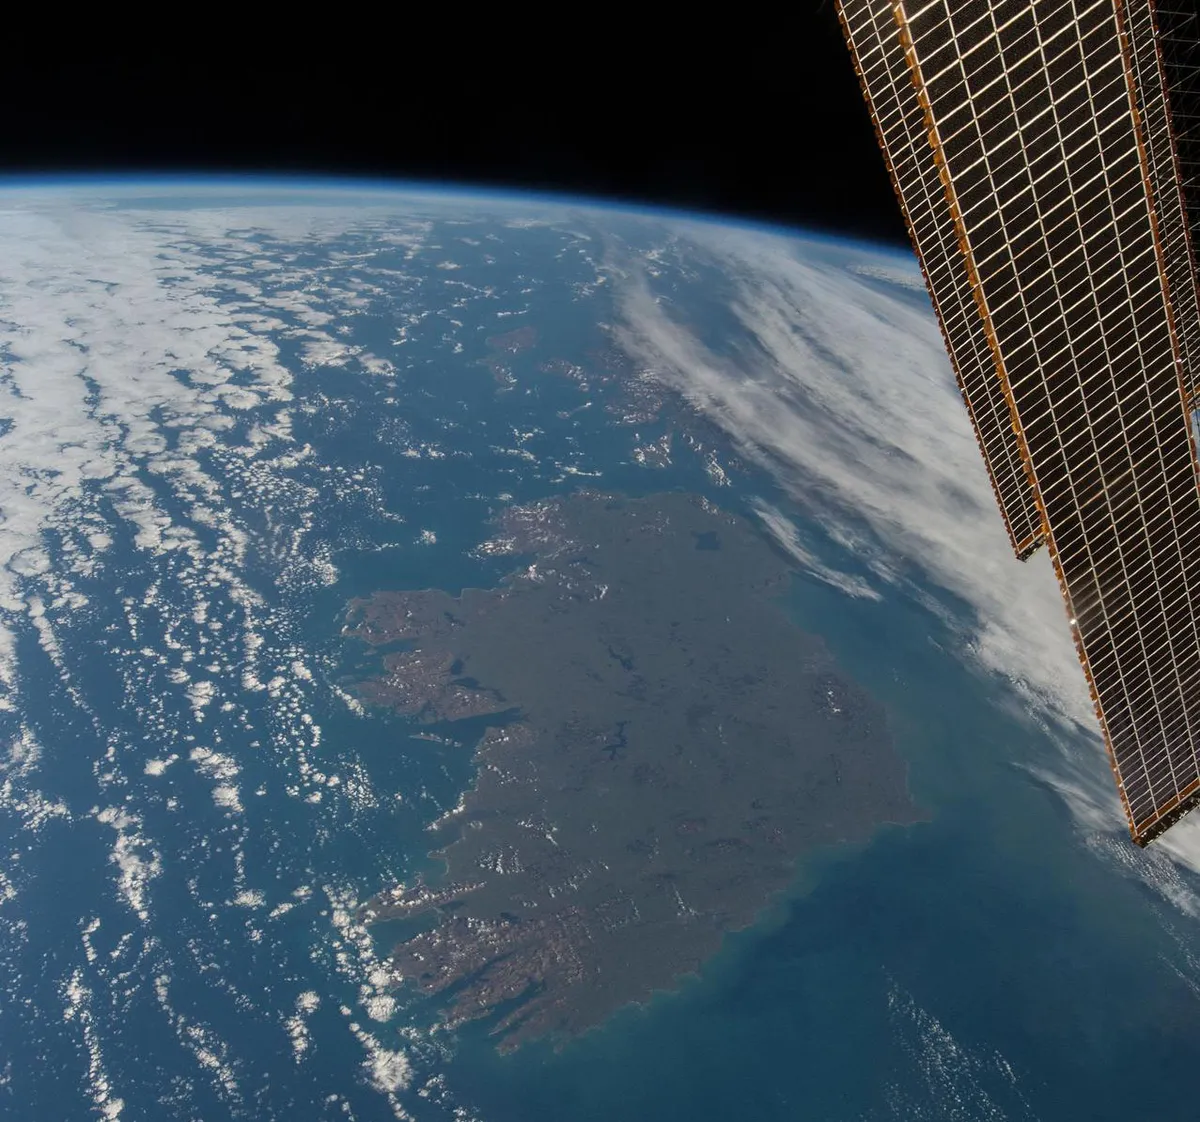 This breathtaking photo of Ireland was captured by former NASA astronaut Terry Virts on 13 March 2015 from the International Space Station. The clouds seem to have parted to enable Virts to get the shot, just 4 days ahead of St Patrick's Day. Easily discernible in the northeast of the island is Lough Neagh, located in Northern Ireland and the largest freshwater lake on the whole island. Also visible in the image are the curvature of the Earth and solar panels providing solar energy to the ISS. Credit: NASA/ESA/Terry Virts